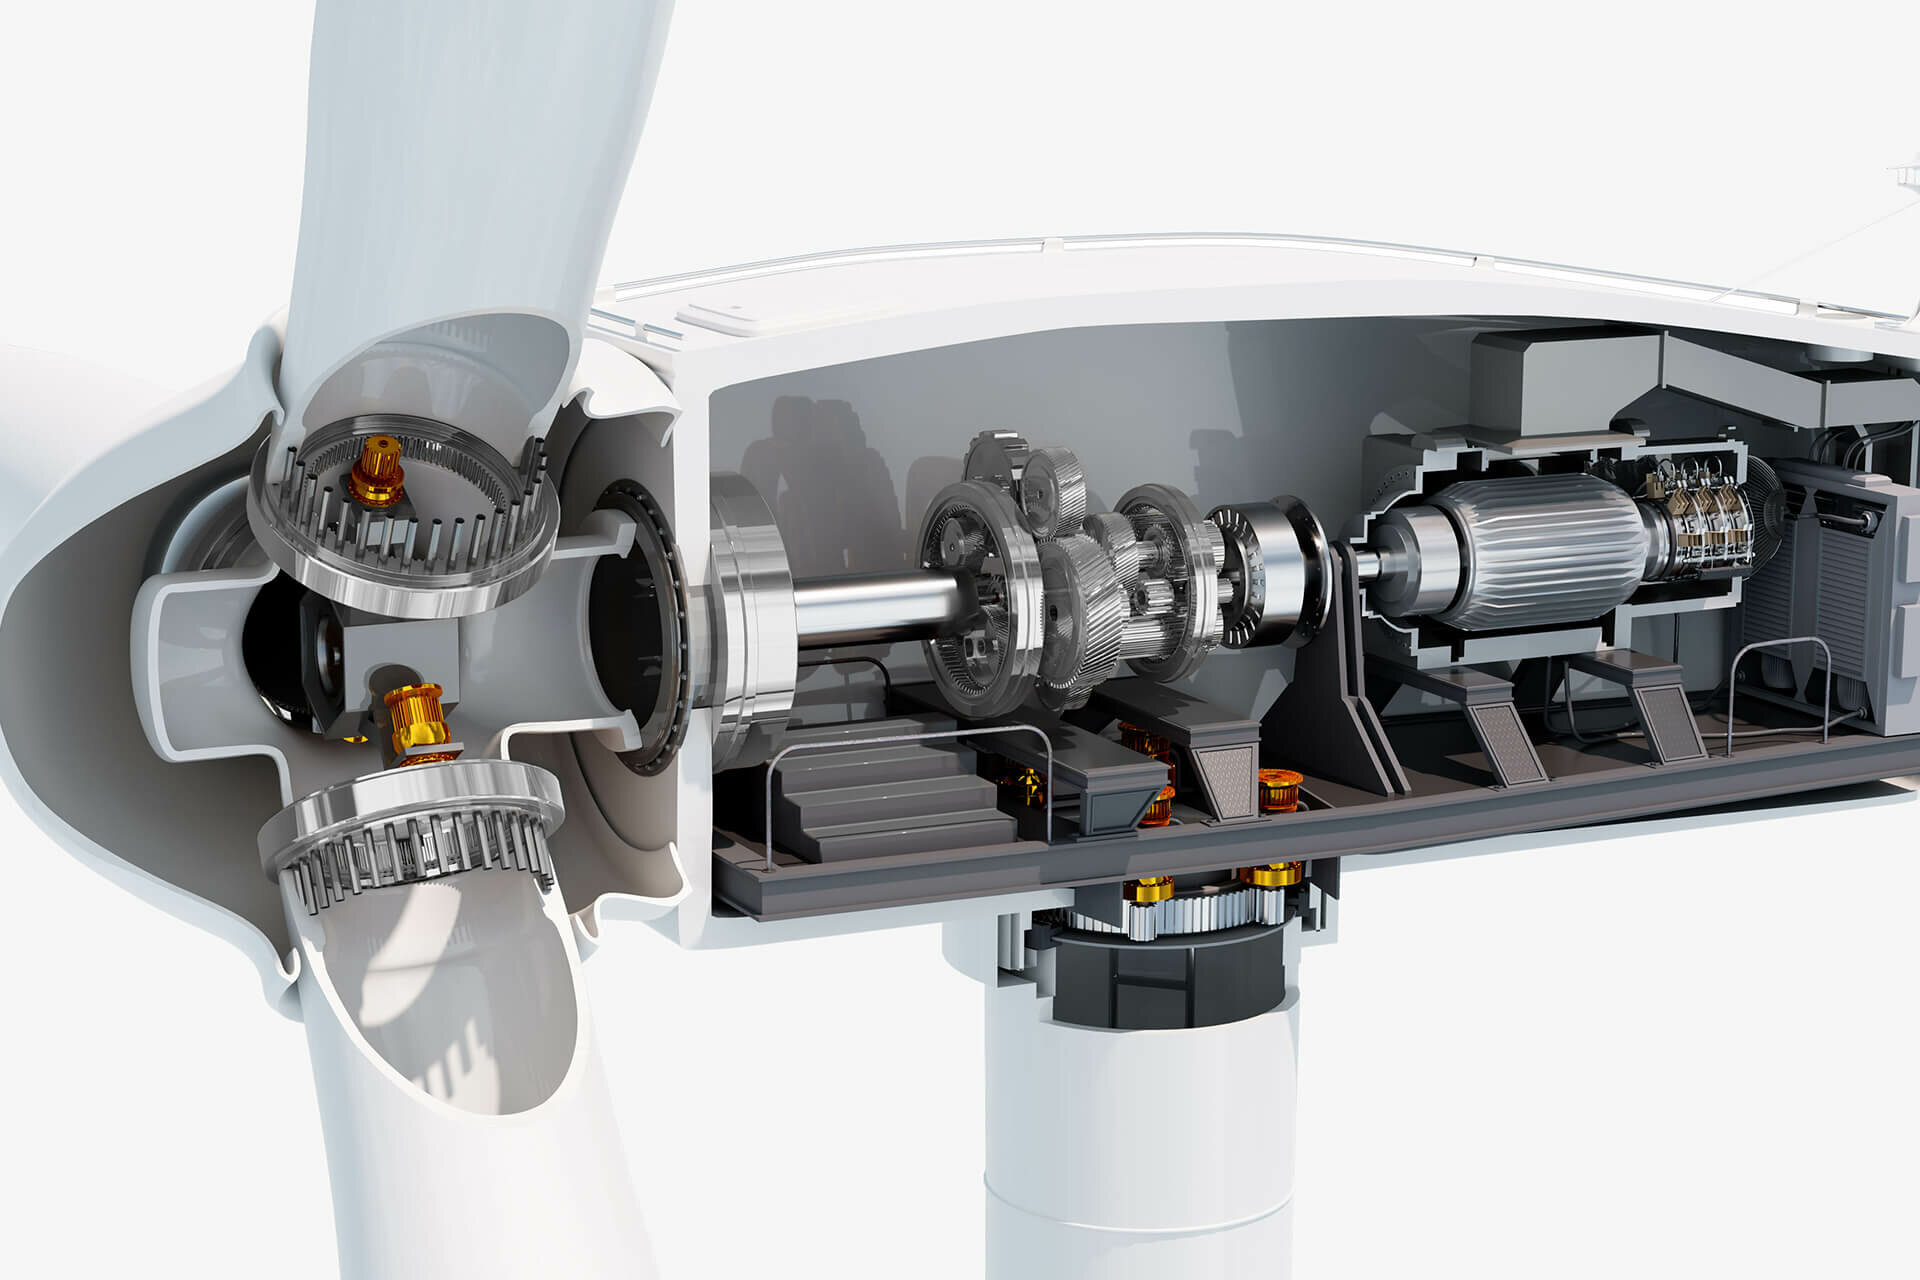 Pitch and azimuth gears for wind turbines